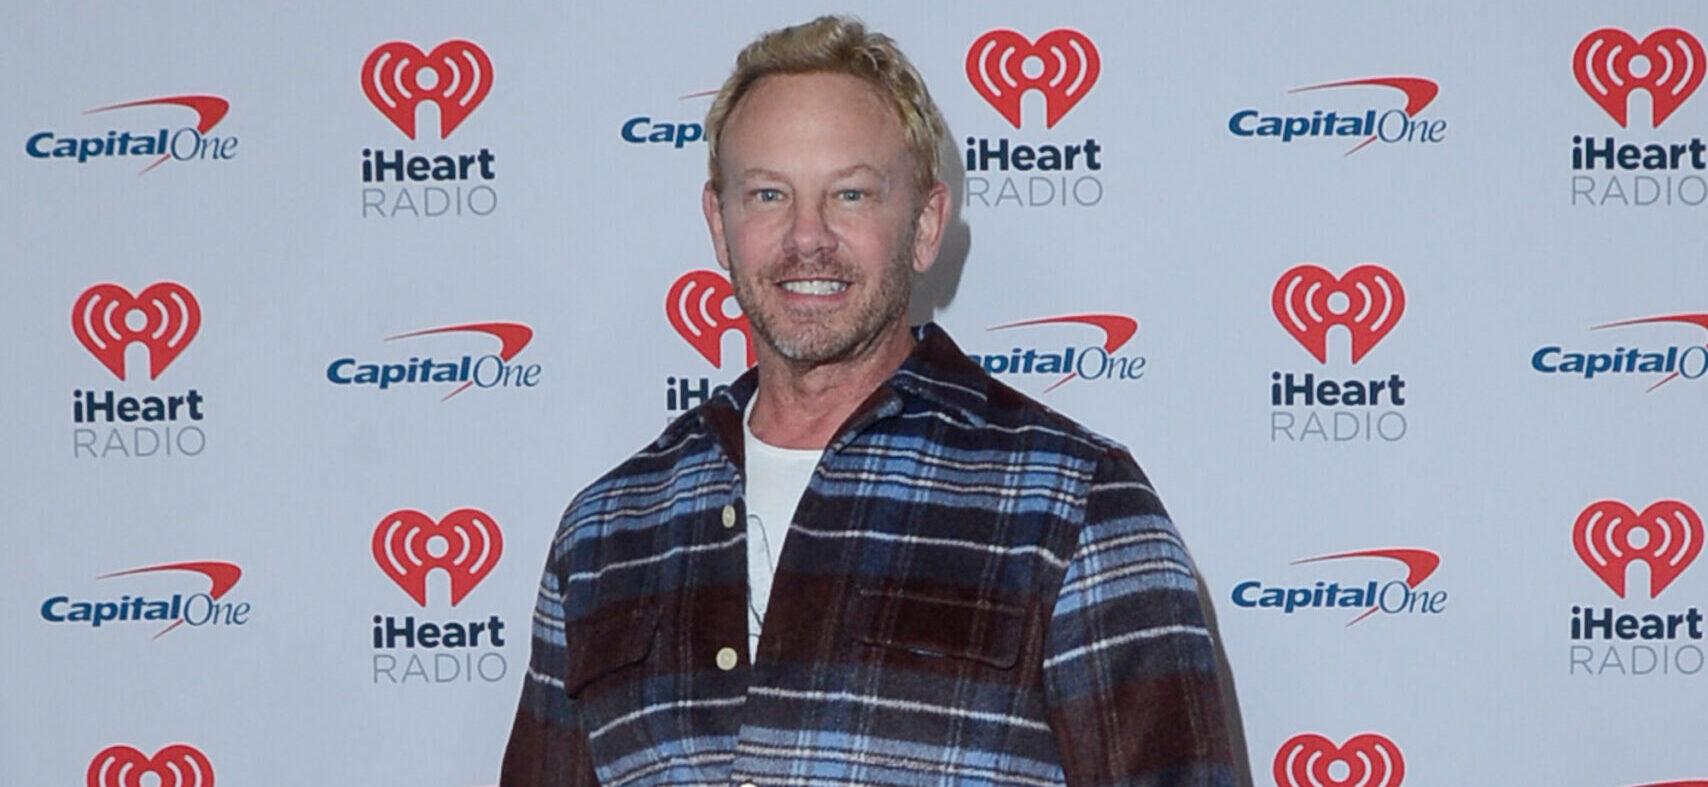 Authorities Continue To Investigate Ian Ziering Incident On Vandalism Charges